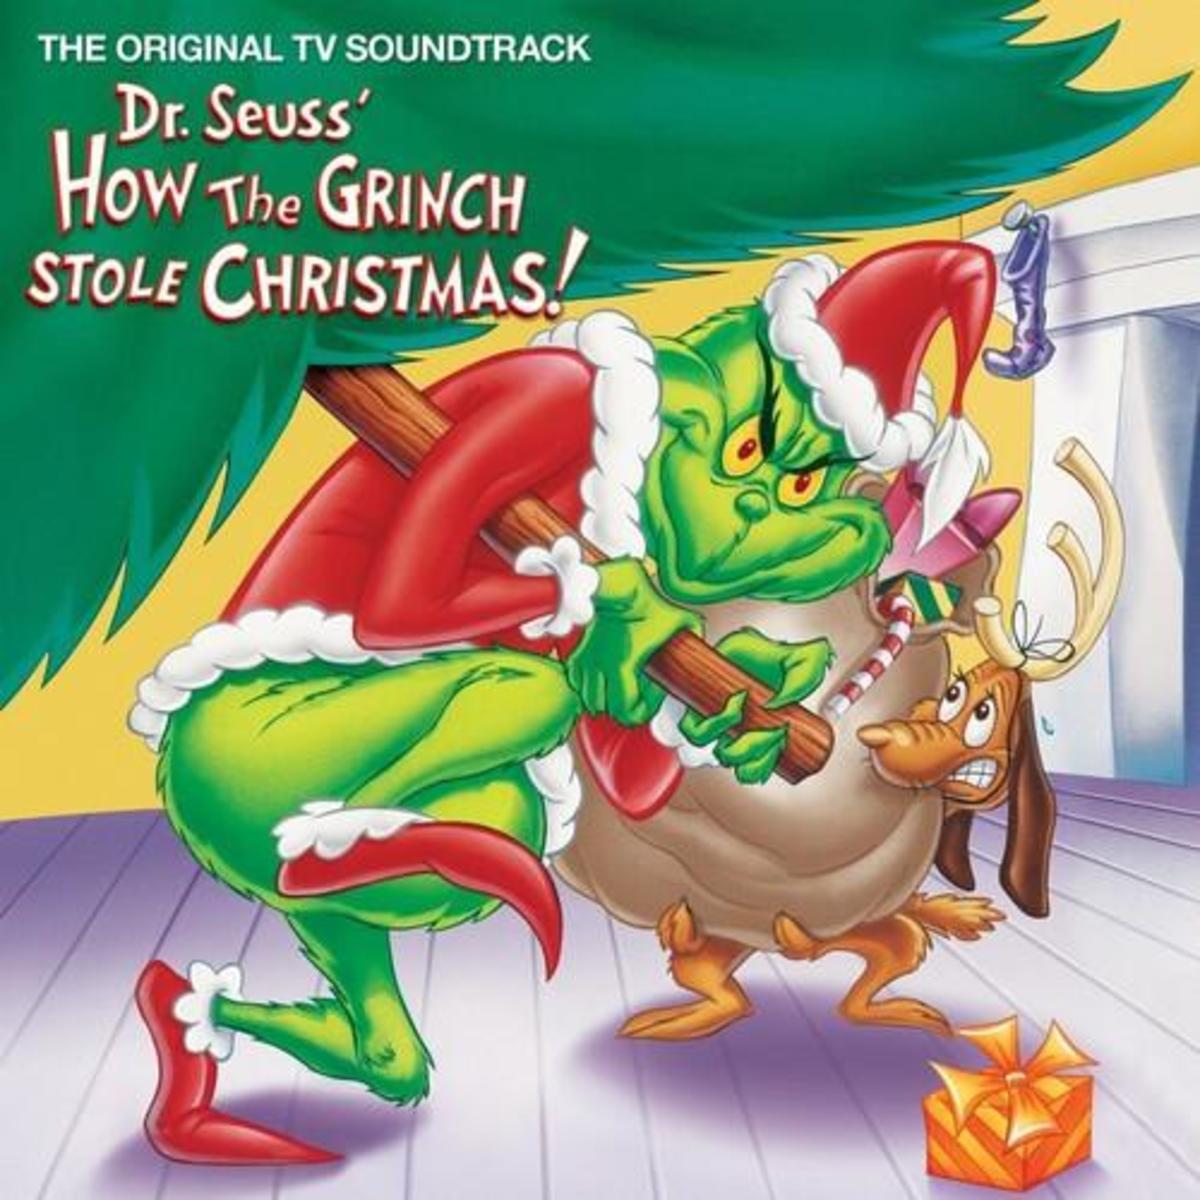 VARIOUS ARTISTS 'DR. SEUSS' HOW THE GRINCH STOLE CHRISTMAS!' (above) is another popular "Grinch" soundtrack album on vinyl.